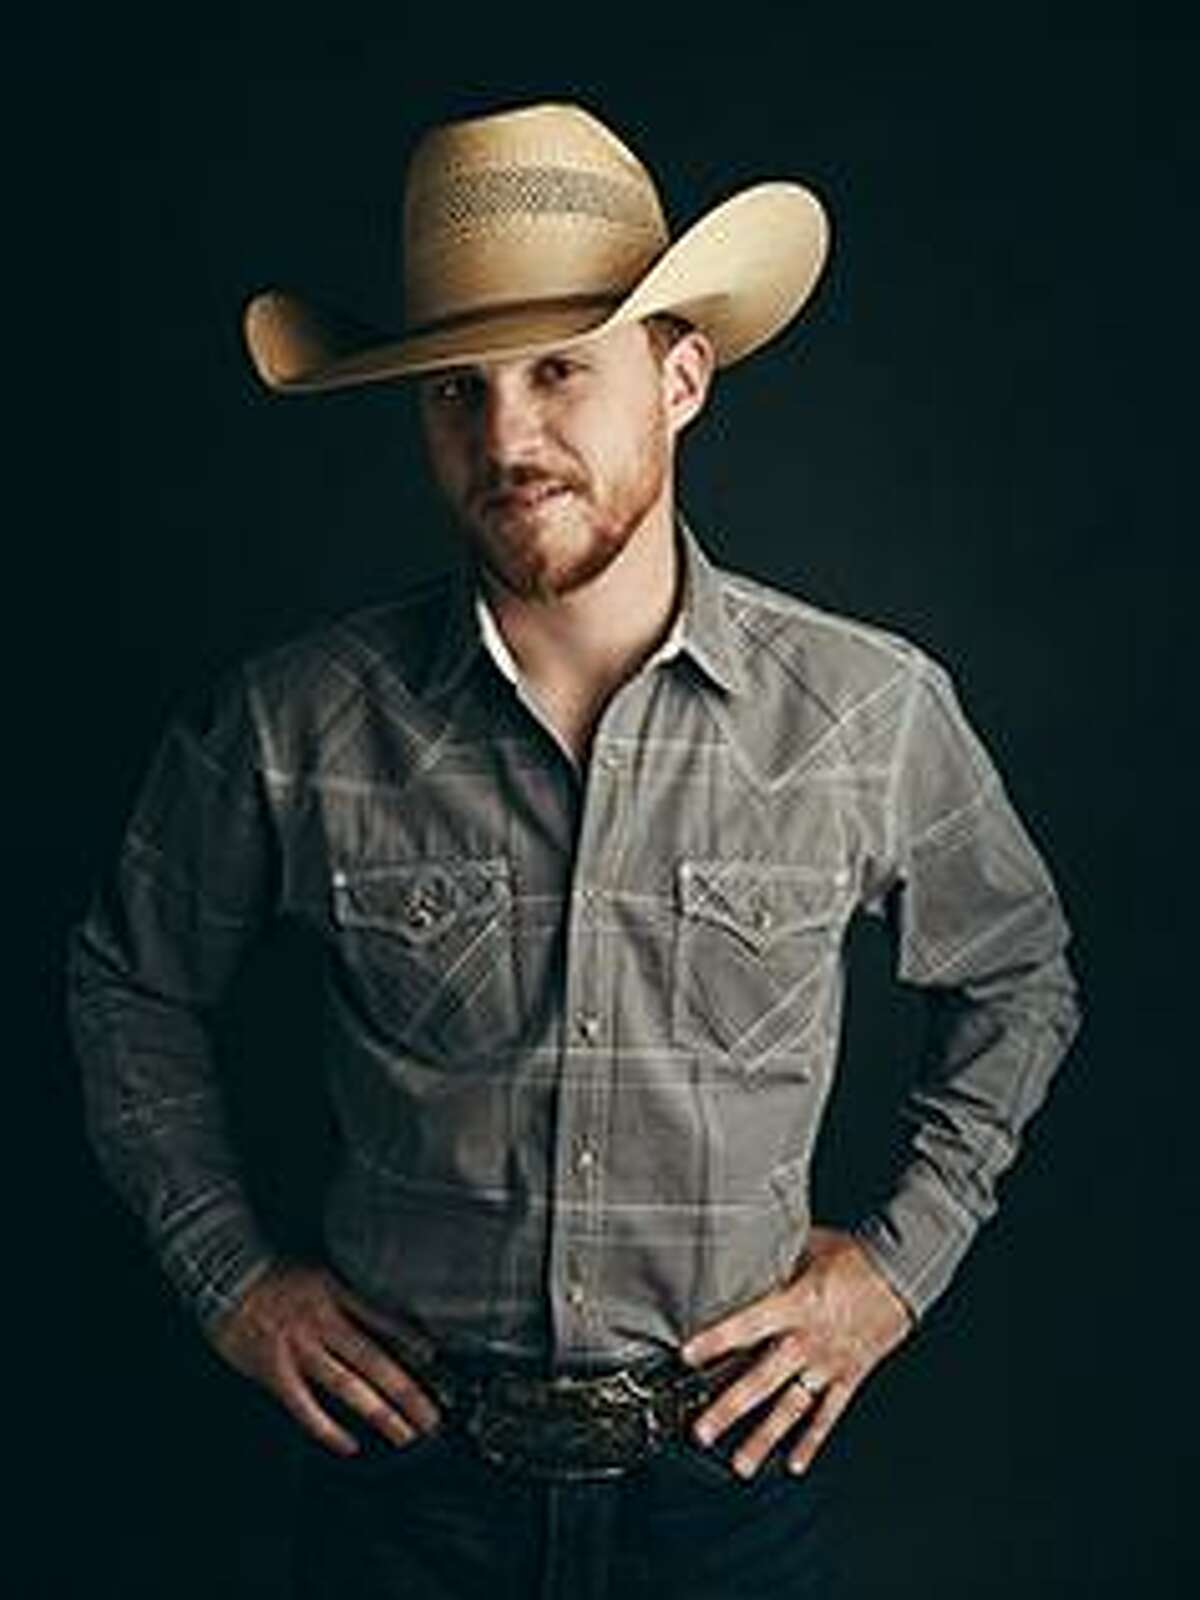 THURSDAY Cody Johnson This new breed of cowboy is just as apt to go into the opening chords of Nirvana’s “Smells Like Teen Spirit” as he is his crowd-pleasing “Son of a Ramblin’ Man.” The young Huntsville-born singer-songwriter is doing things his way as an indie artist who can get to the top of the Billboard charts. His latest is “Gotta Be Me.” 7 p.m. Thursday at the San Antonio Stock Show & Rodeo at the AT&T Center, 1 AT&T Parkway. $13-$65 (plus grounds admission). sarodeo.com. Hector Saldana